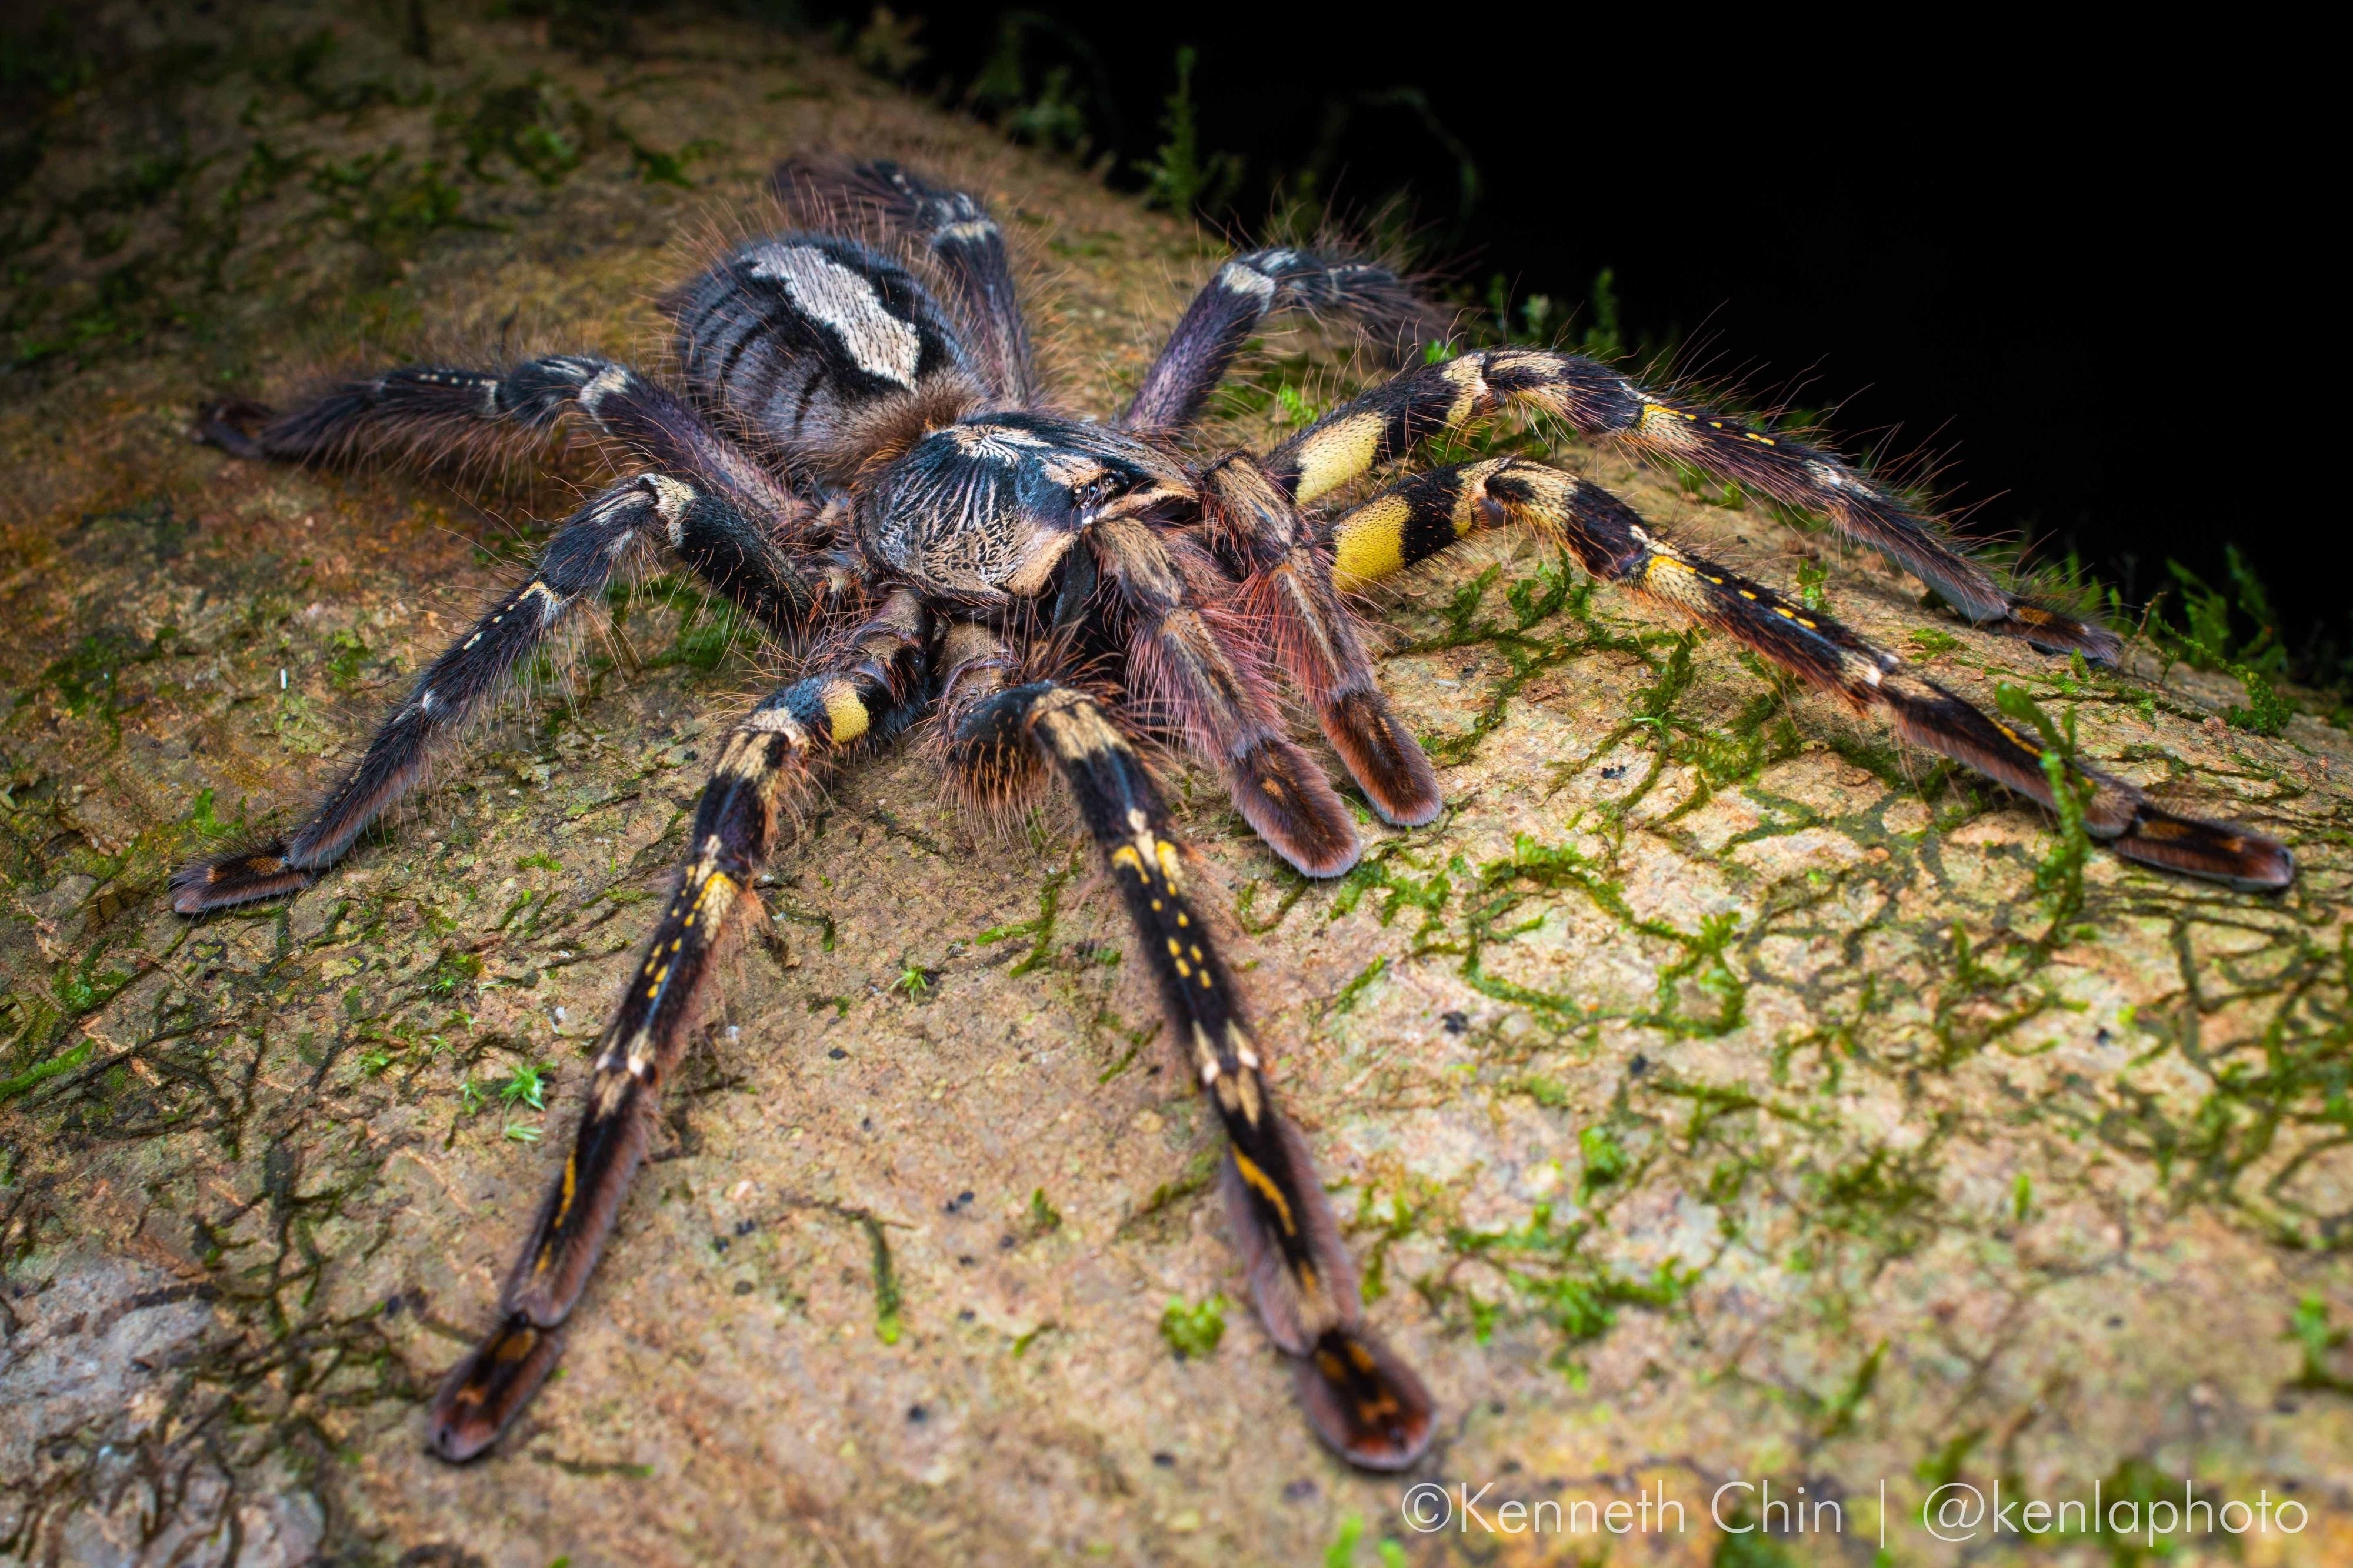 The ornate tiger spider, which is endemic to Sri Lanka, is a popular traded species.  Photo: Kenneth Chin